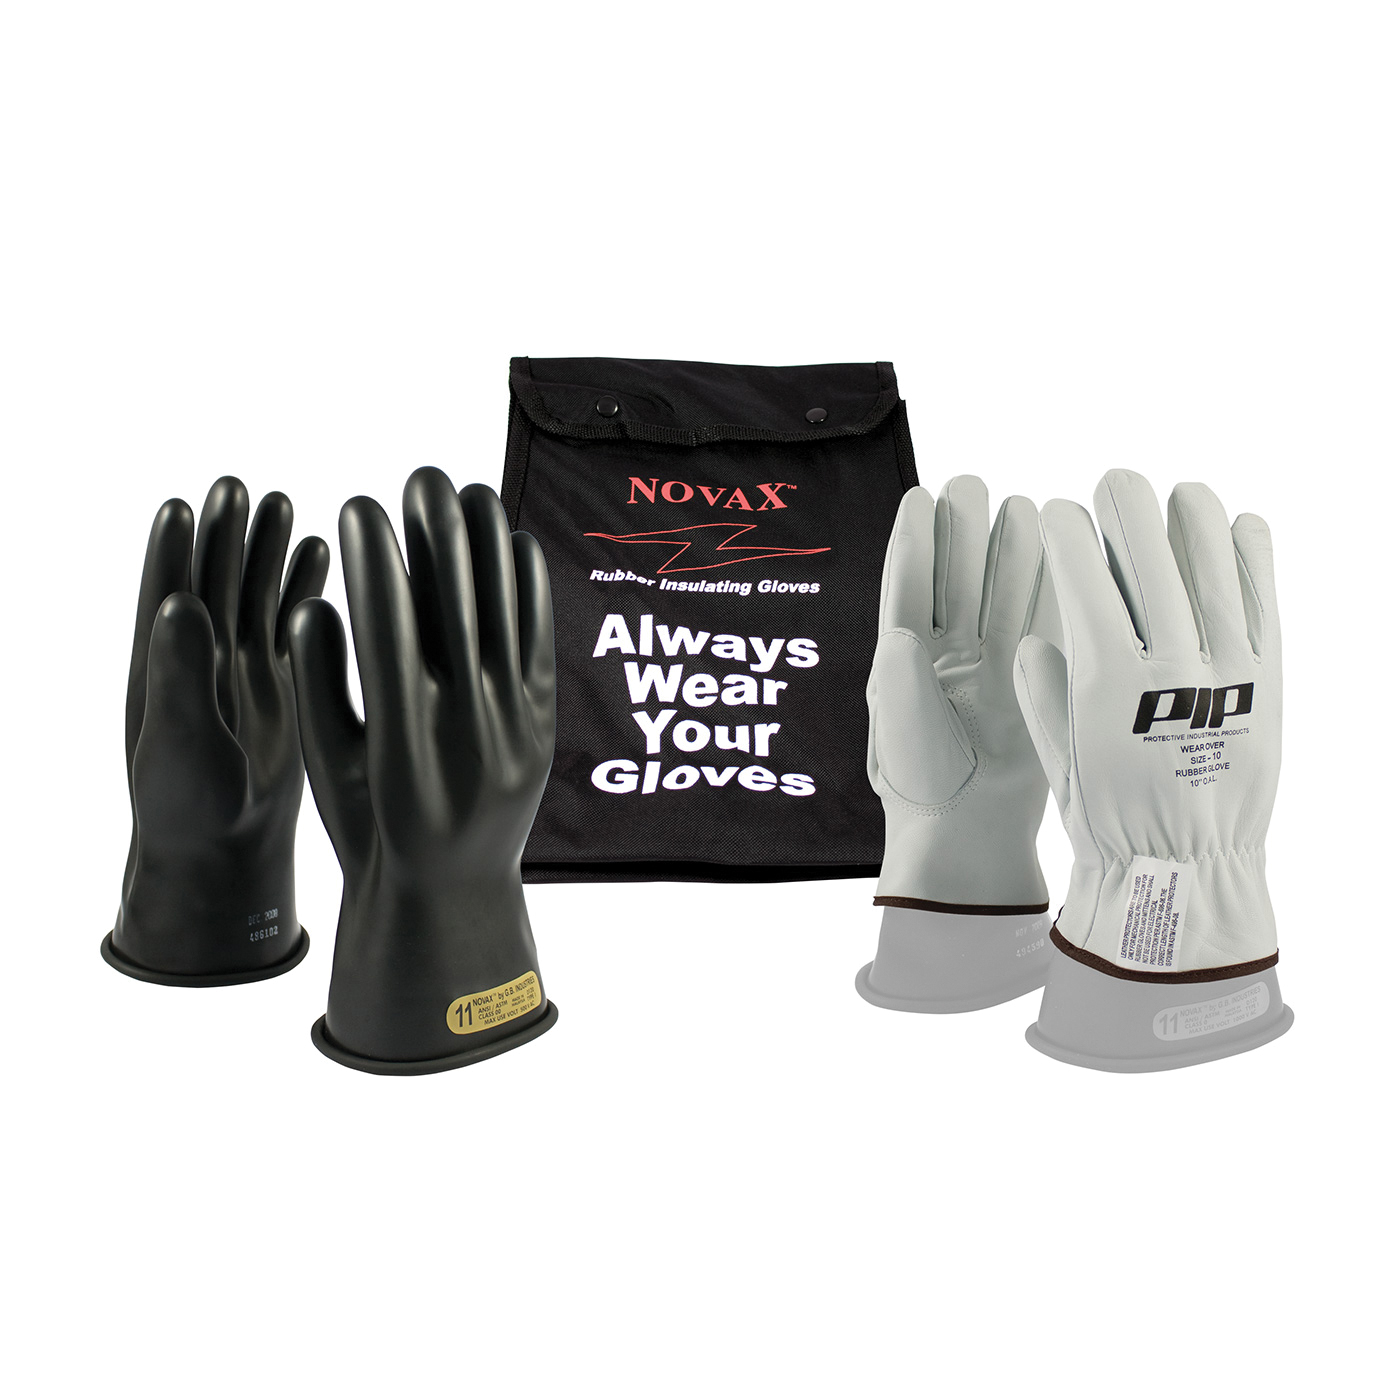 Novax® 150-SK-00/10-KIT Insulating Unisex Electrical Safety Gloves Kit, SZ 10, Goatskin Leather/Natural Rubber, Black/Natural, 11 in L, ASTM Class: Class 00, 500 VAC, 750 VDC Max Use Voltage